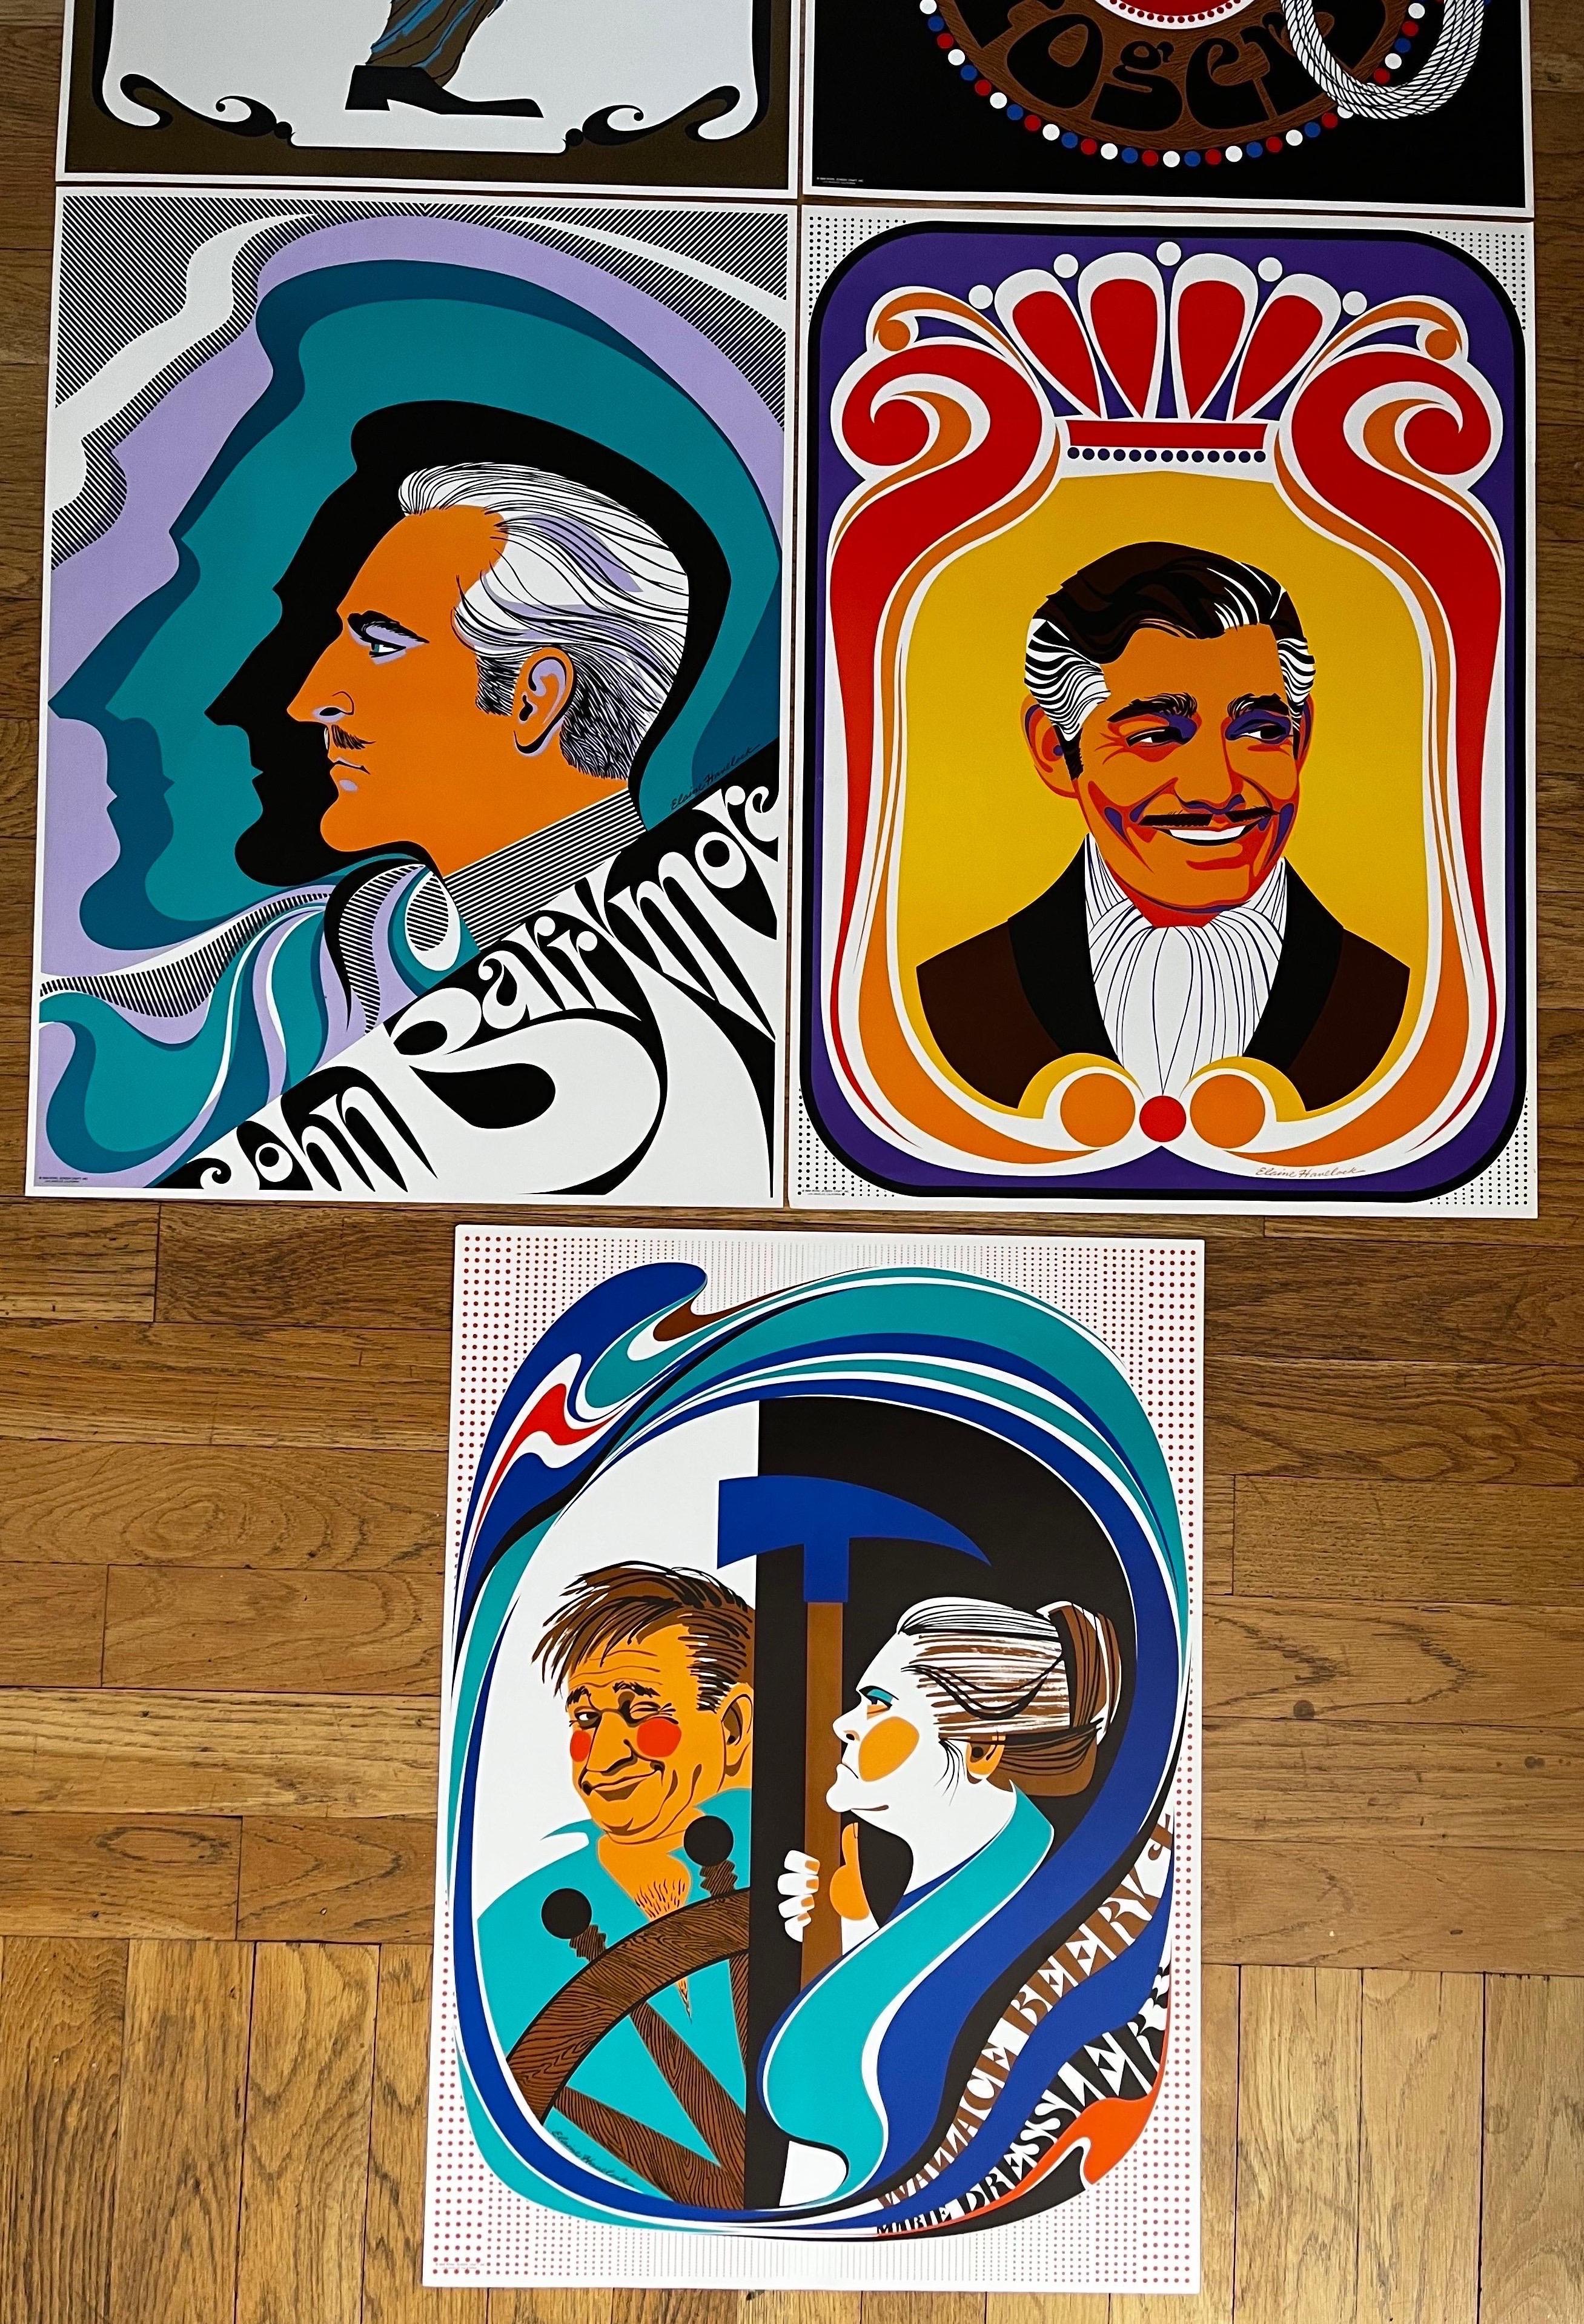 Set of '9' 1968 Elaine Havelock Posters Printed by Royal Screen Craft Inc For Sale 7